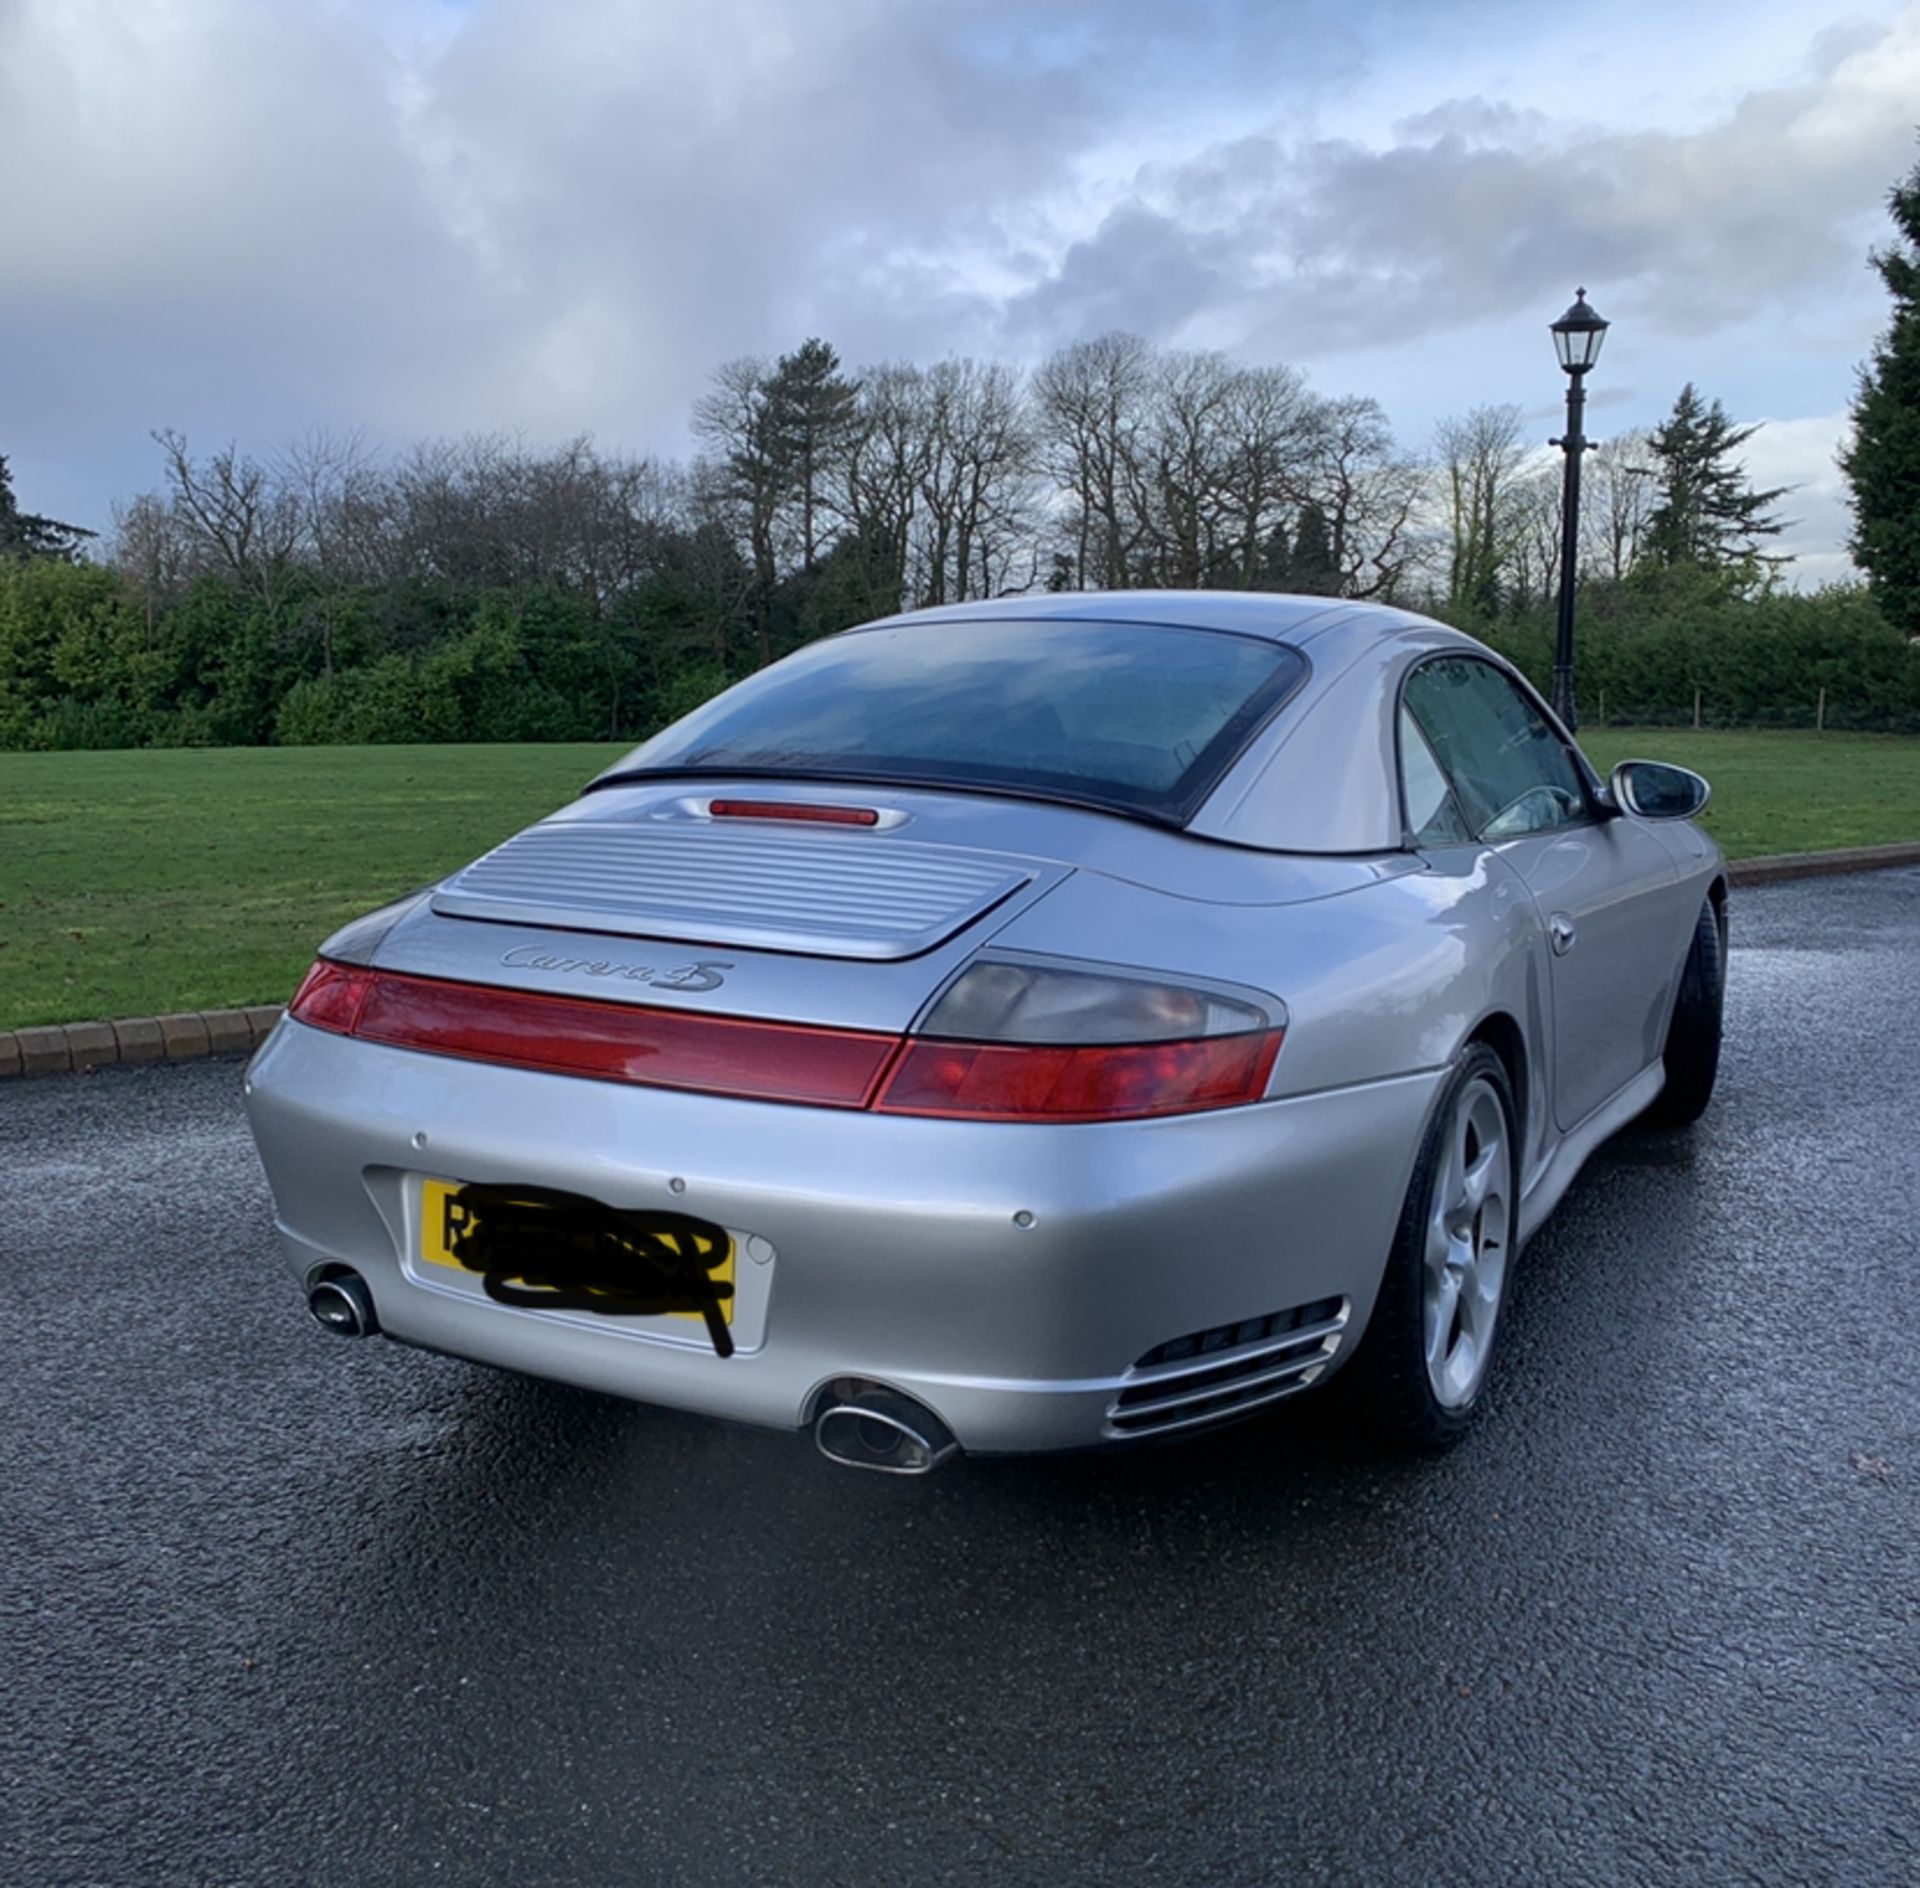 2003/53 REG PORSCHE 911 CARRERA 4S TIP S 3.6L PETROL SILVER CONVERTIBLE, SHOWING 3 FORMER KEEPERS - Image 4 of 10